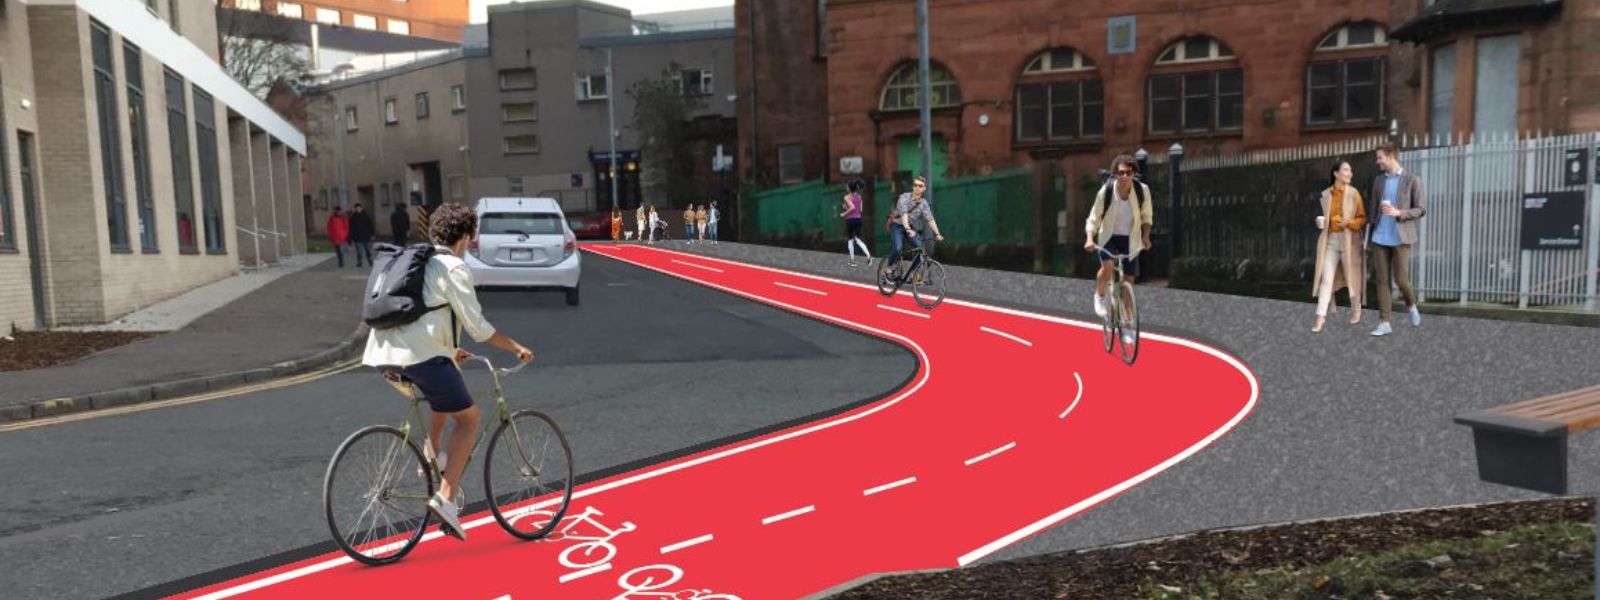 Vision for St James Road with a new cycle lane